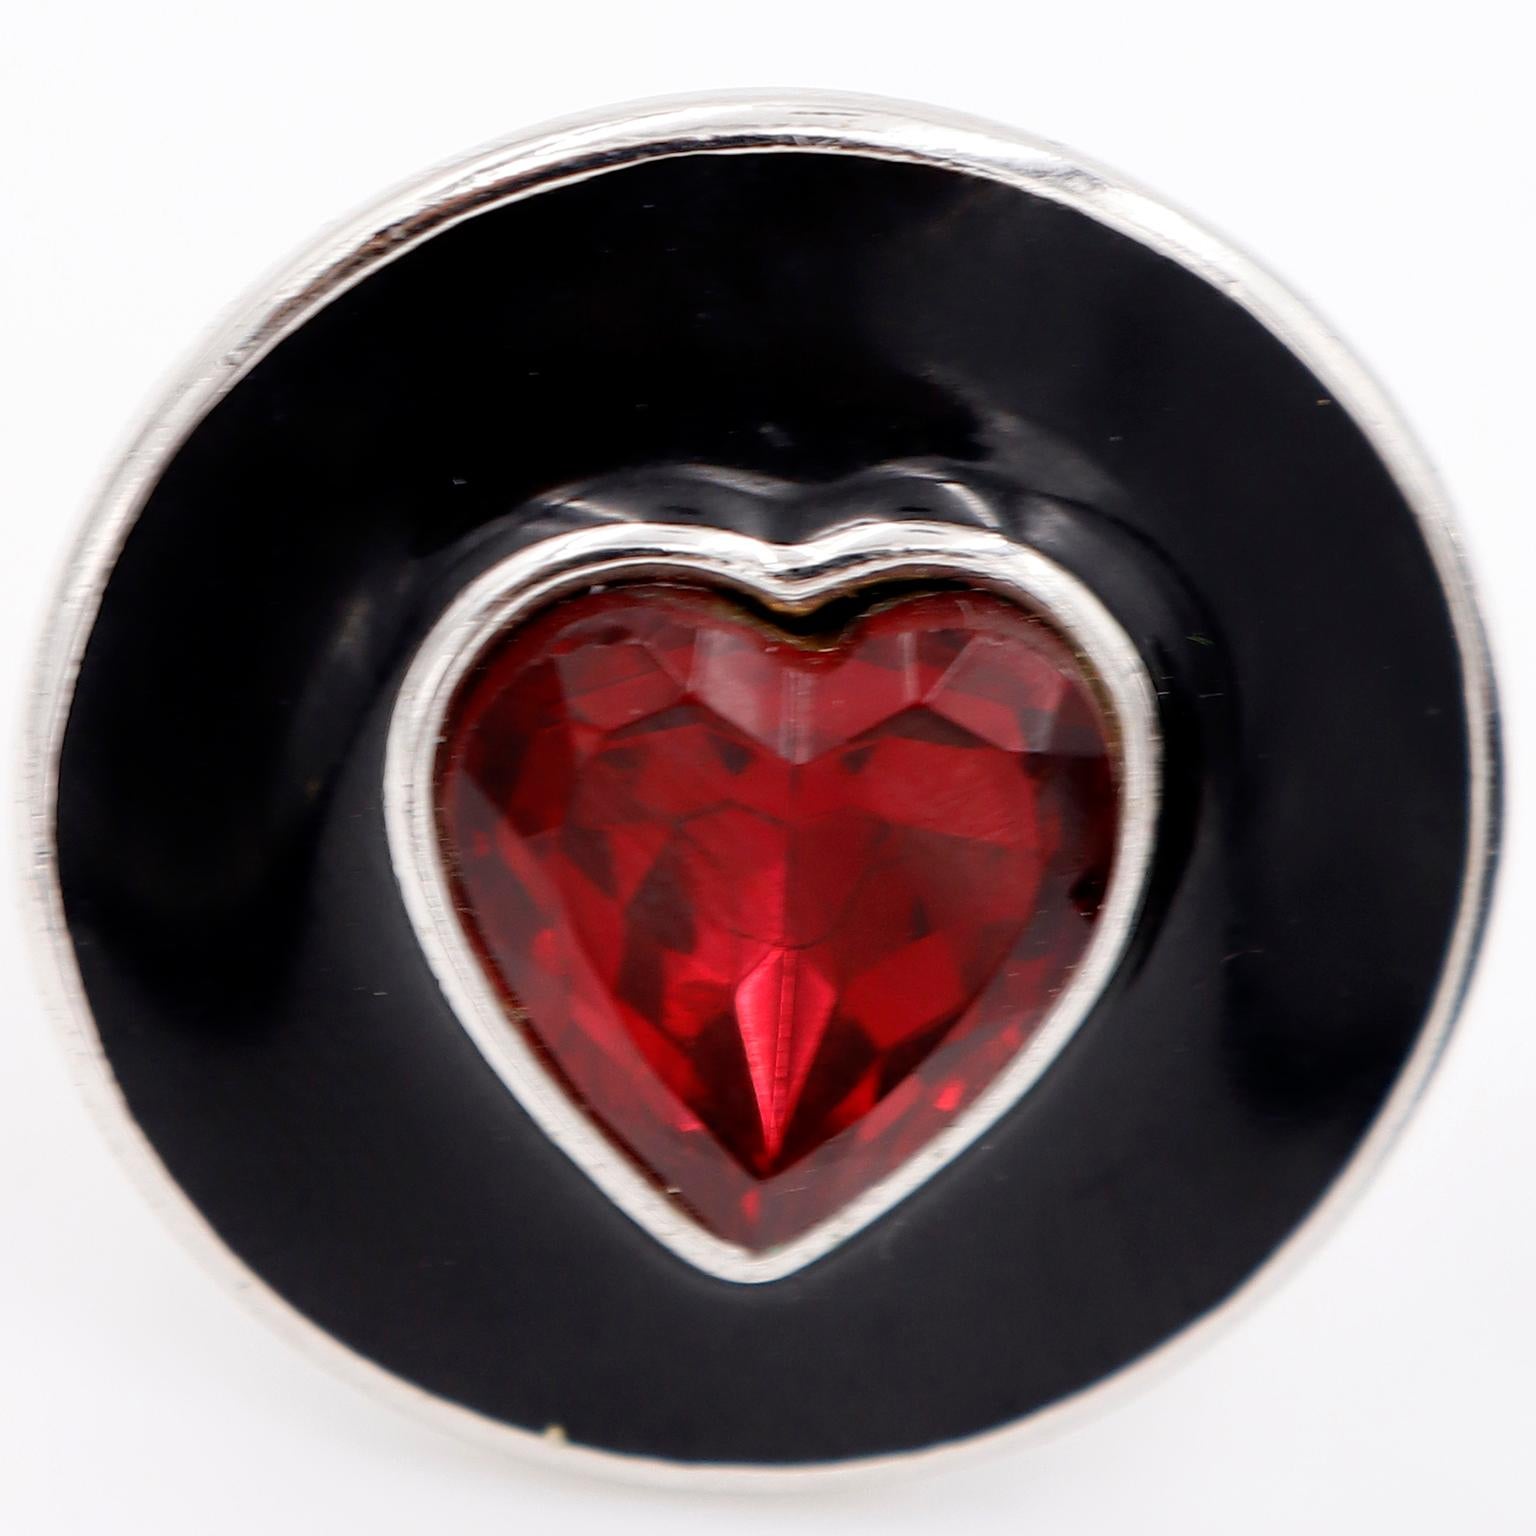 These beautiful vintage Yves Saint Laurent earrings feature YSL's signature hearts which were a familiar theme in a lot of his jewelry.. The clip earrings are on a silver plate base metal with black enamel and center red faceted heart shaped